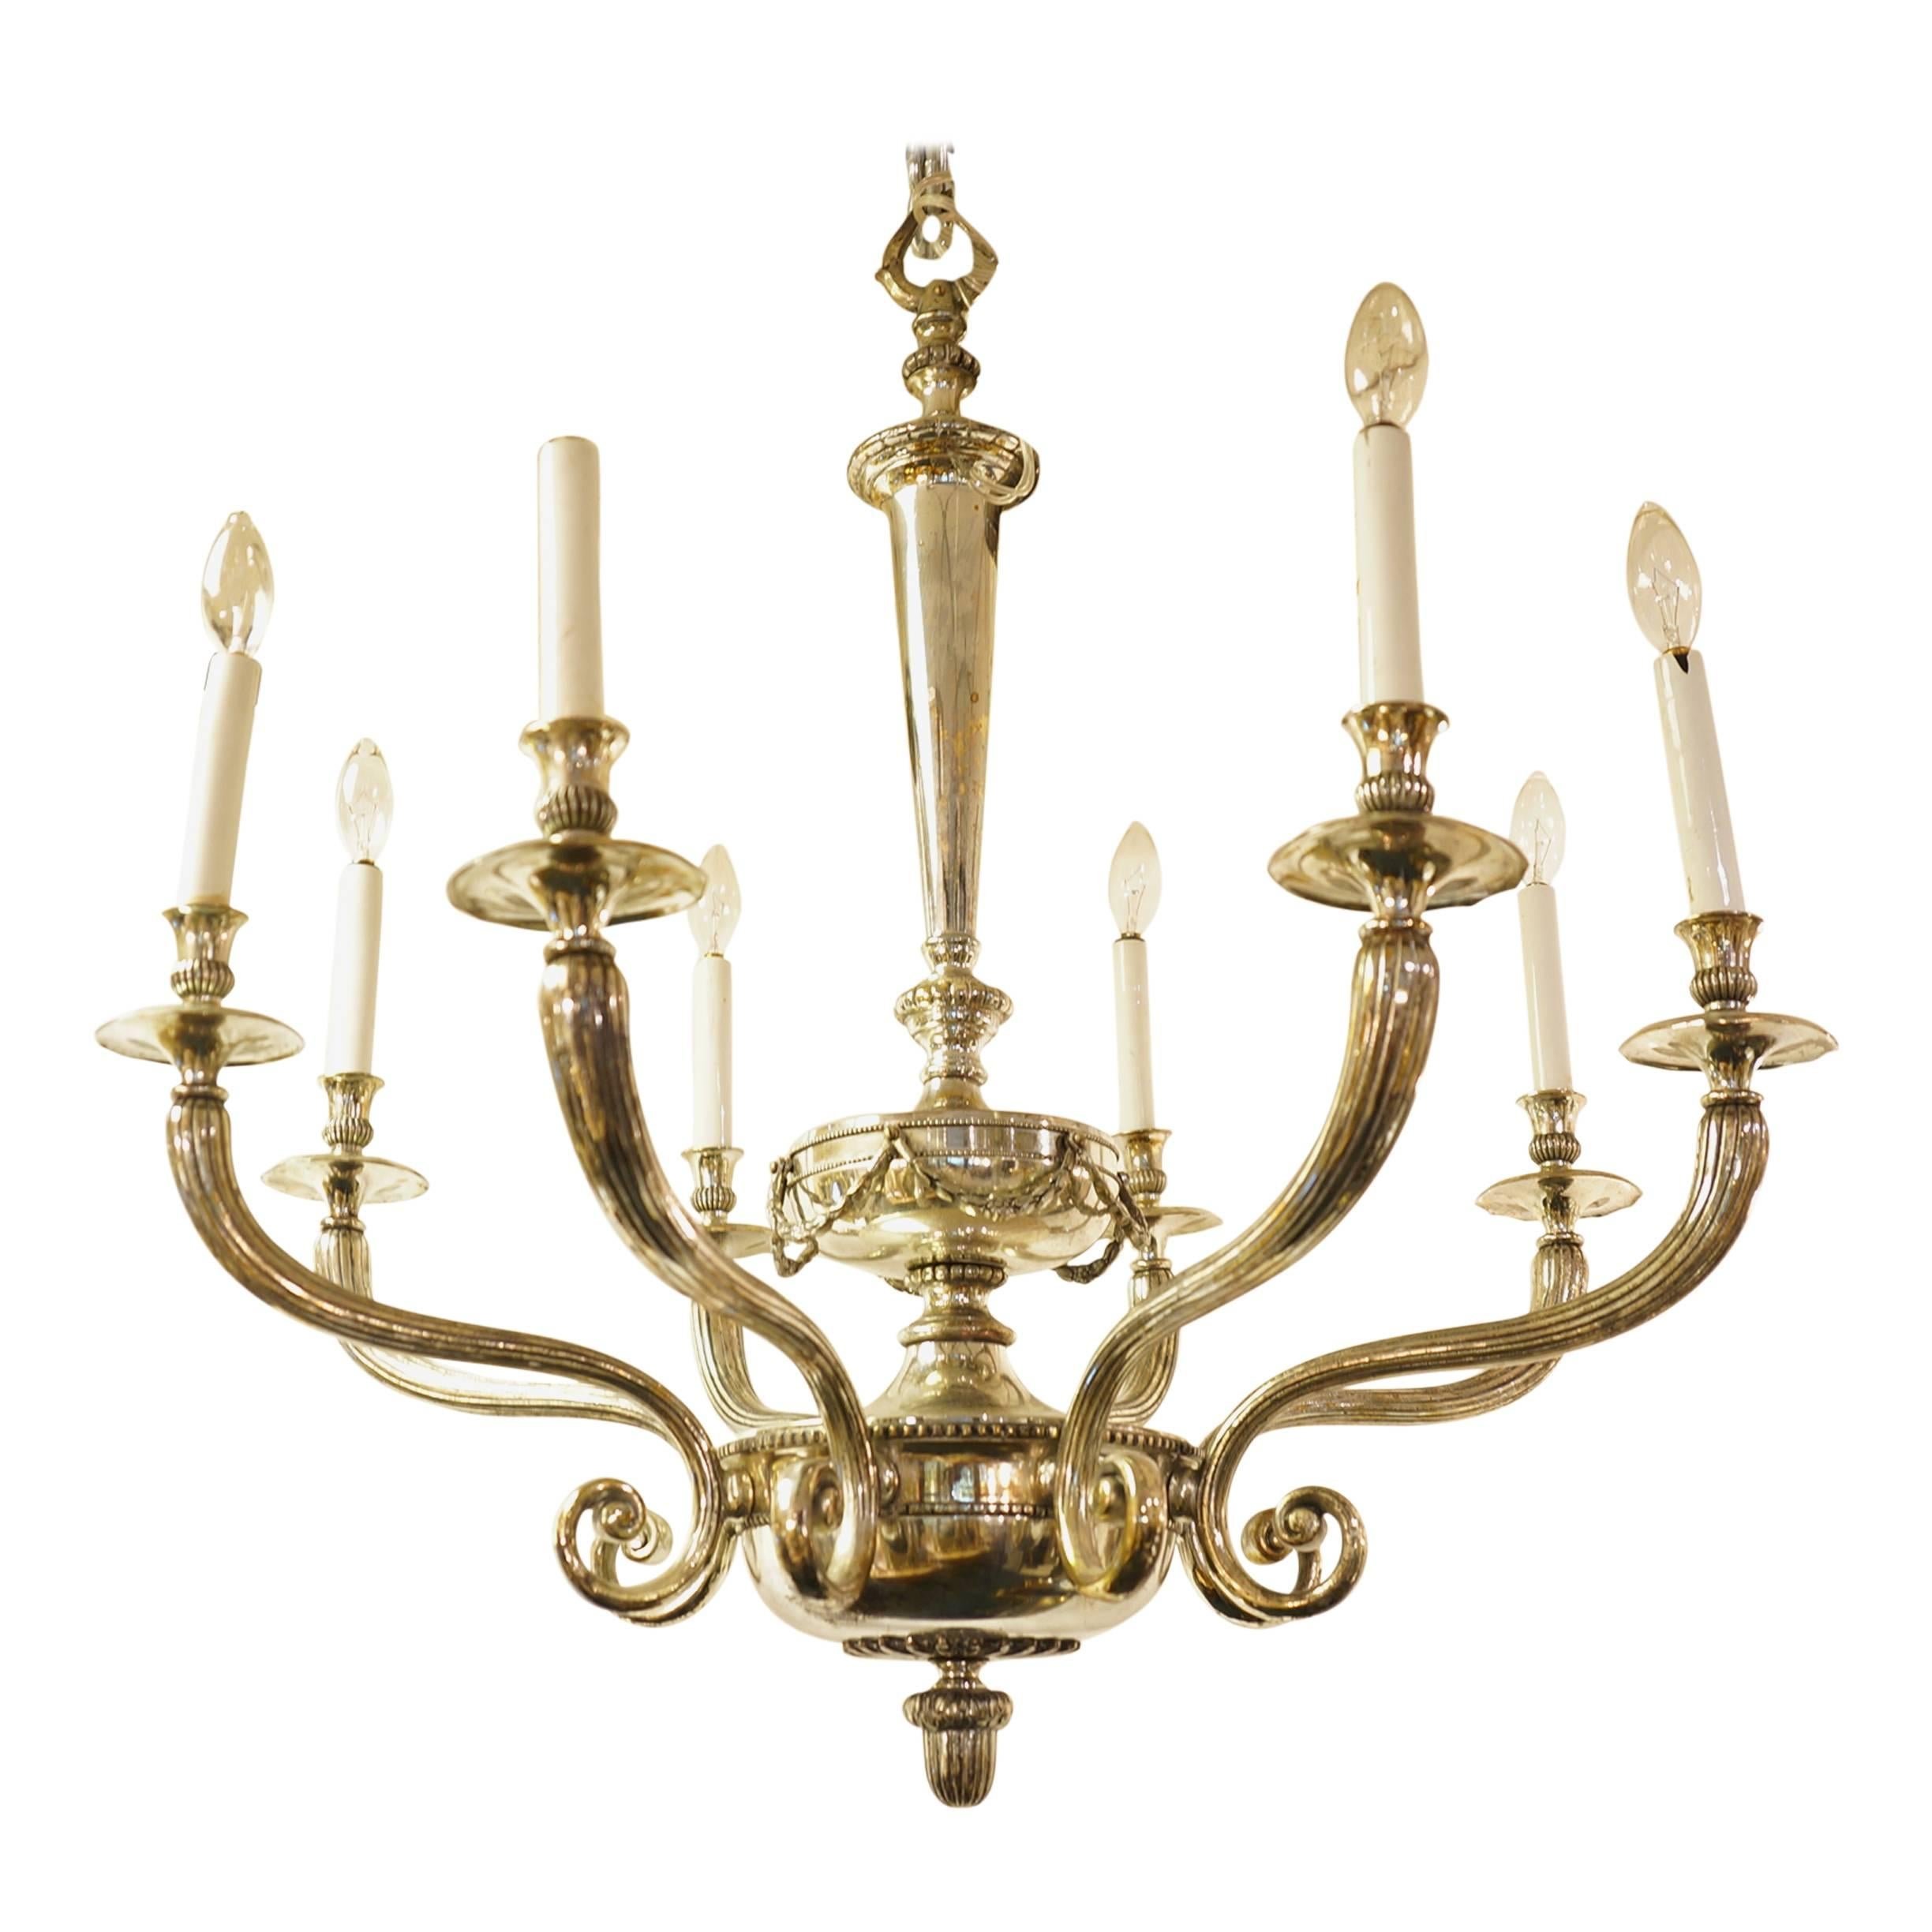 Neoclassical Eight-Arm Silvered Chandelier Attributed to Caldwell and Co. 